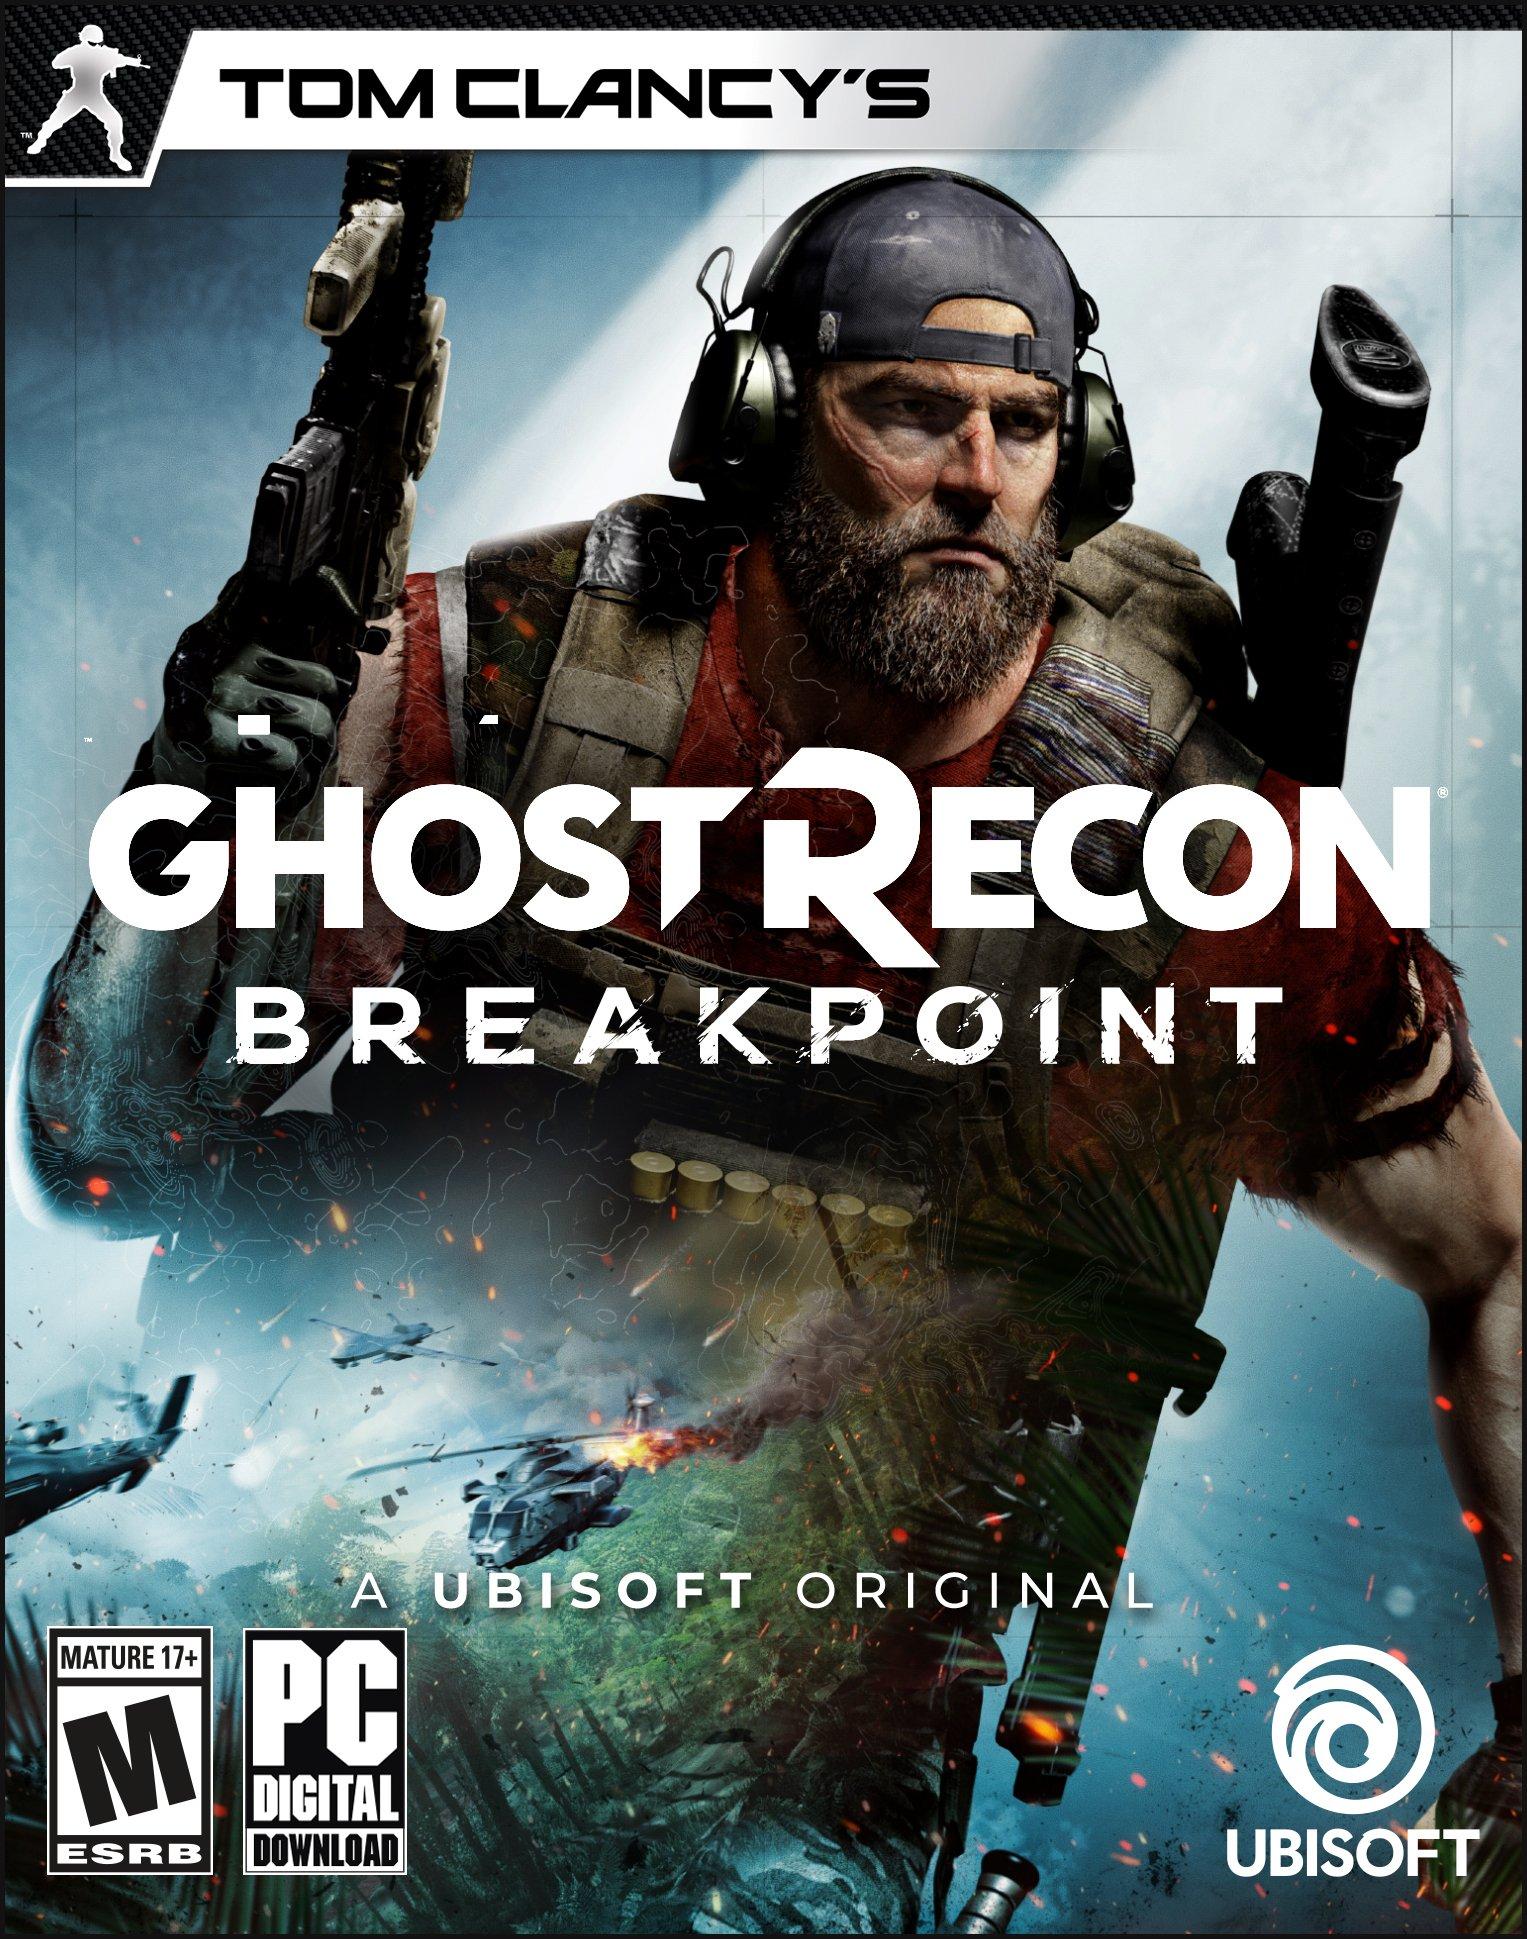 what type of game is ghost recon breakpoint